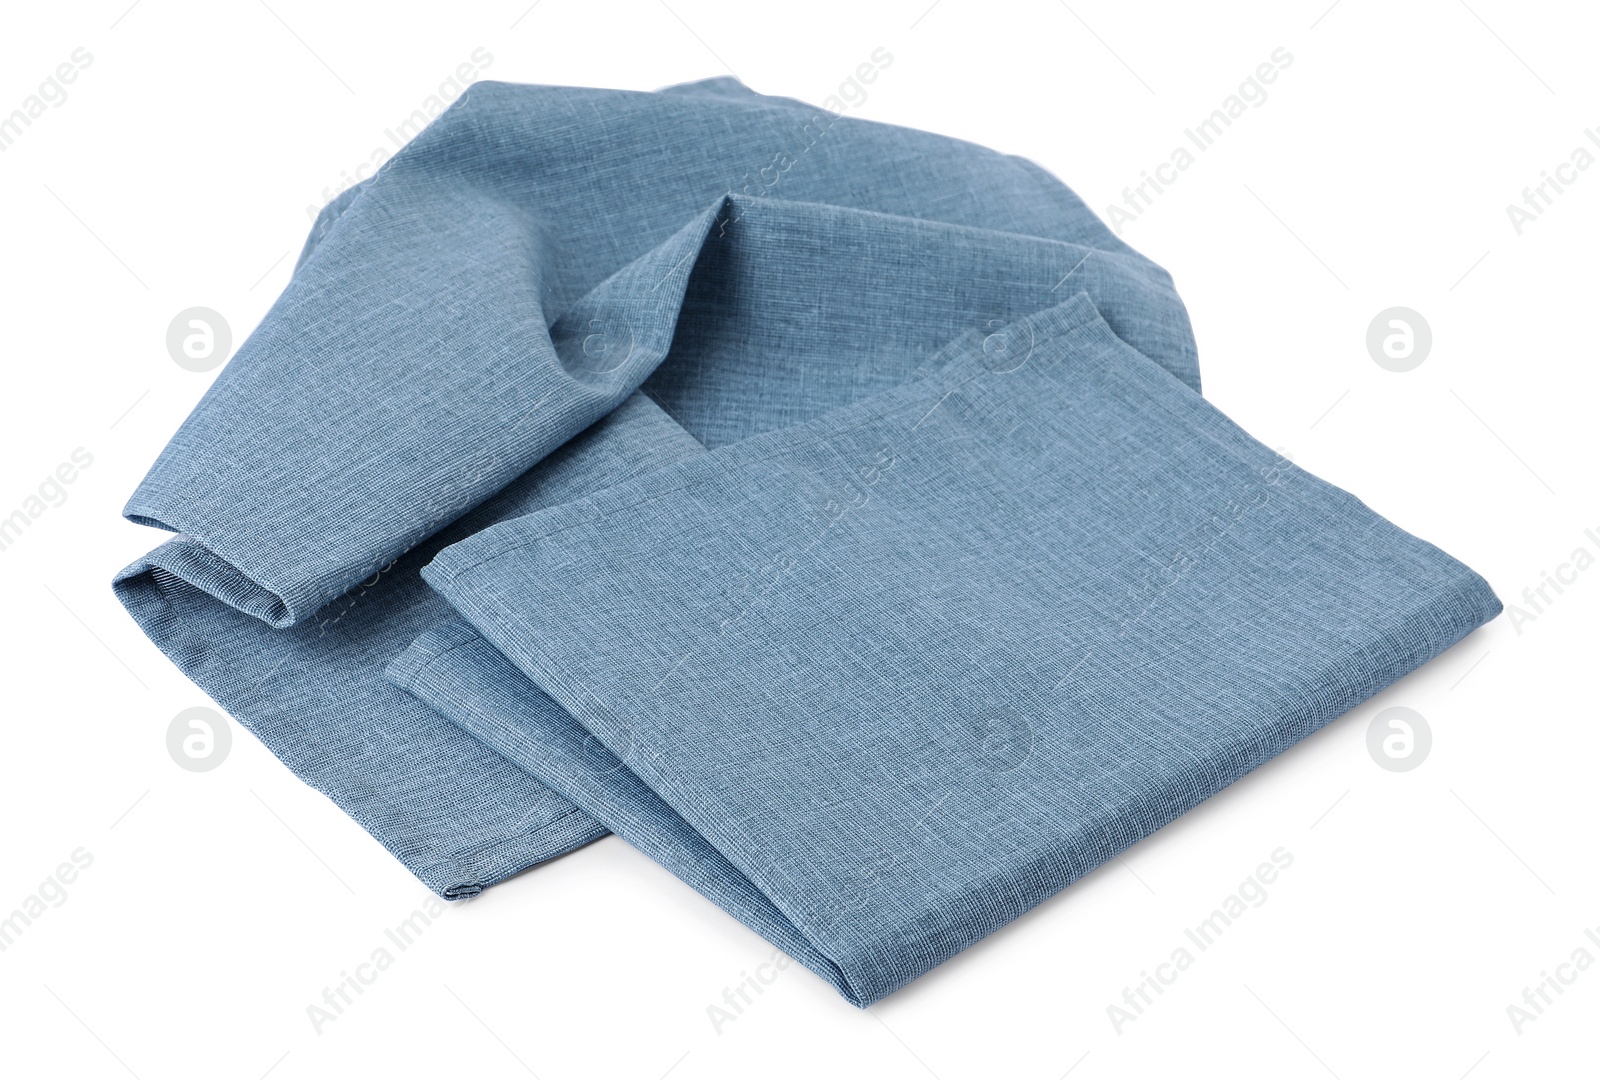 Photo of New clean light blue cloth napkins isolated on white